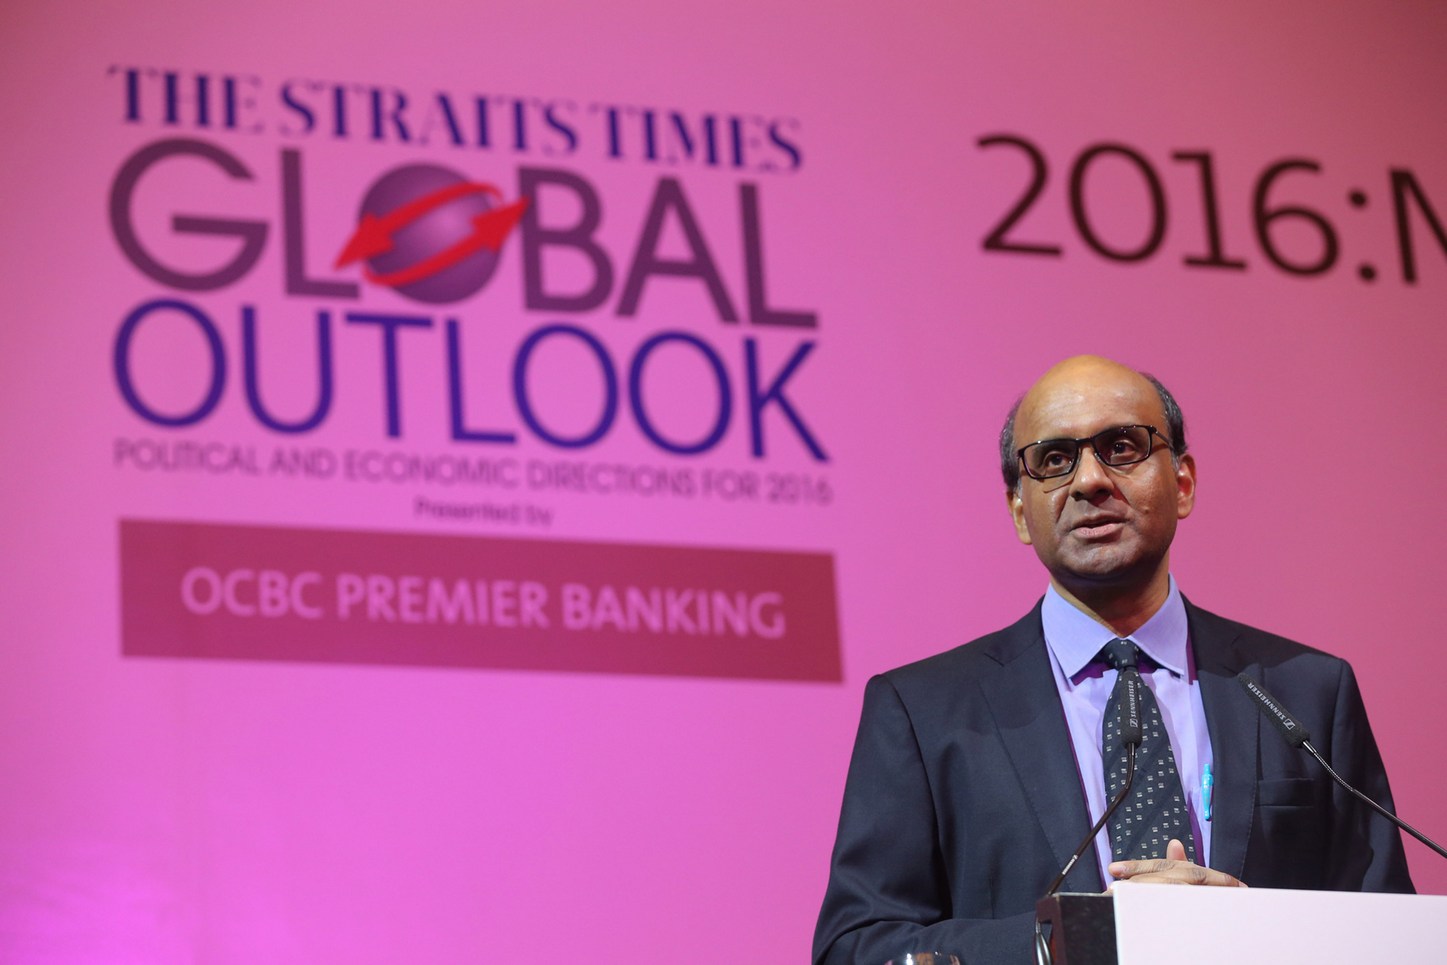 DPM Tharman at the Straits Times Global Outlook Forum 